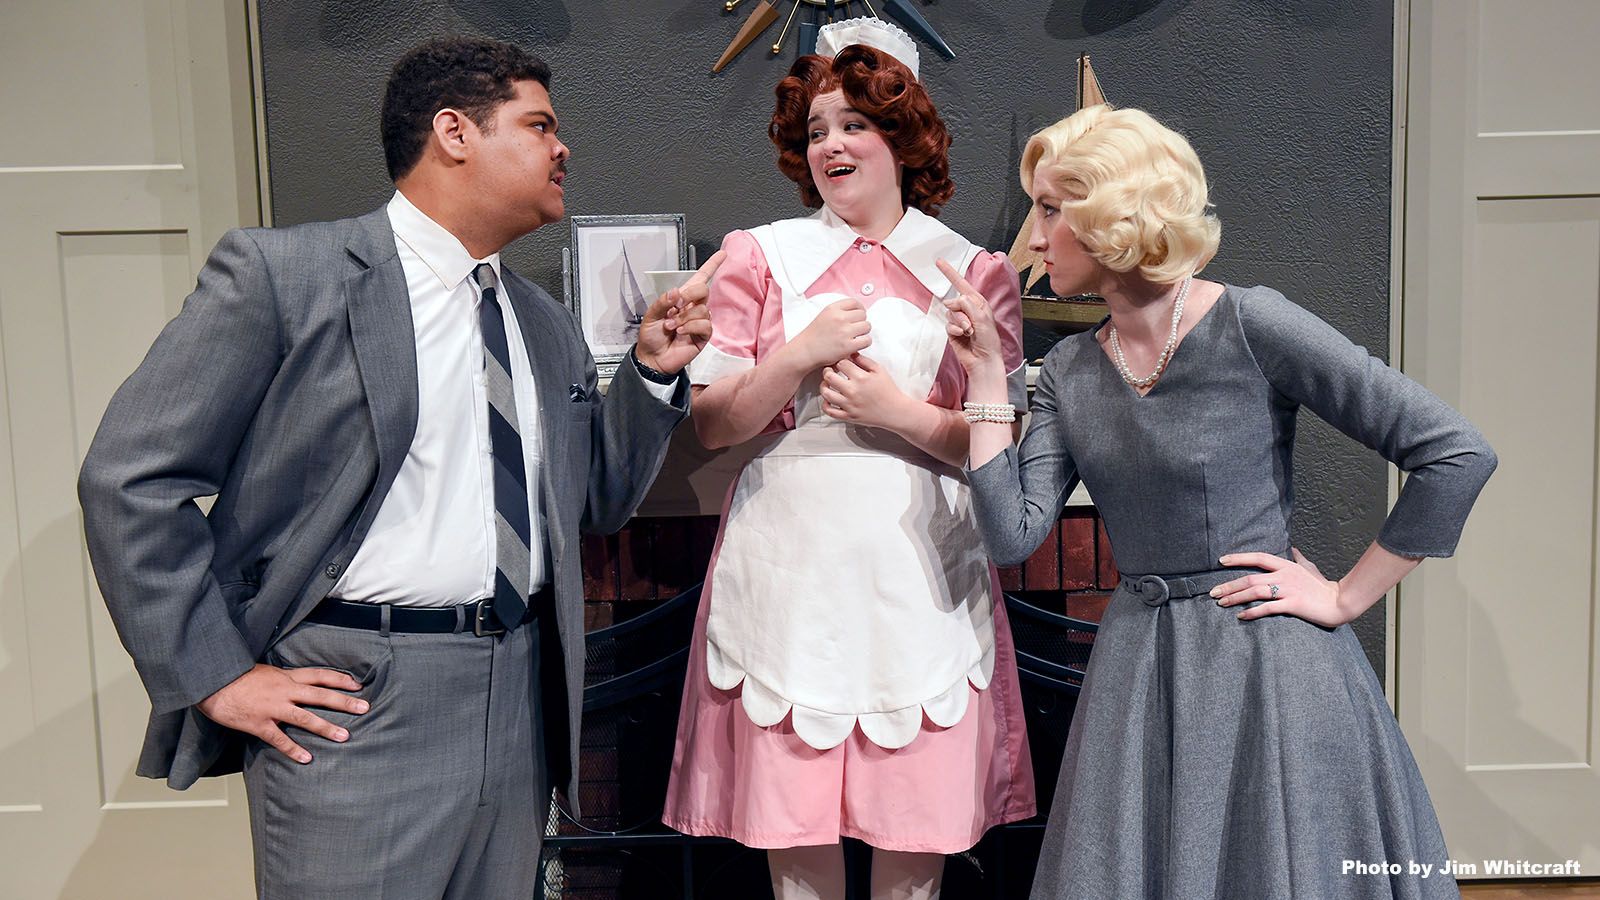 The PFW Department of Theatre will present The Bald Soprano from Sept. 22-30 at Williams Theatre. Pictured are, from left, Jackson McKinney, Sarah Rock, and Callie McKinney.